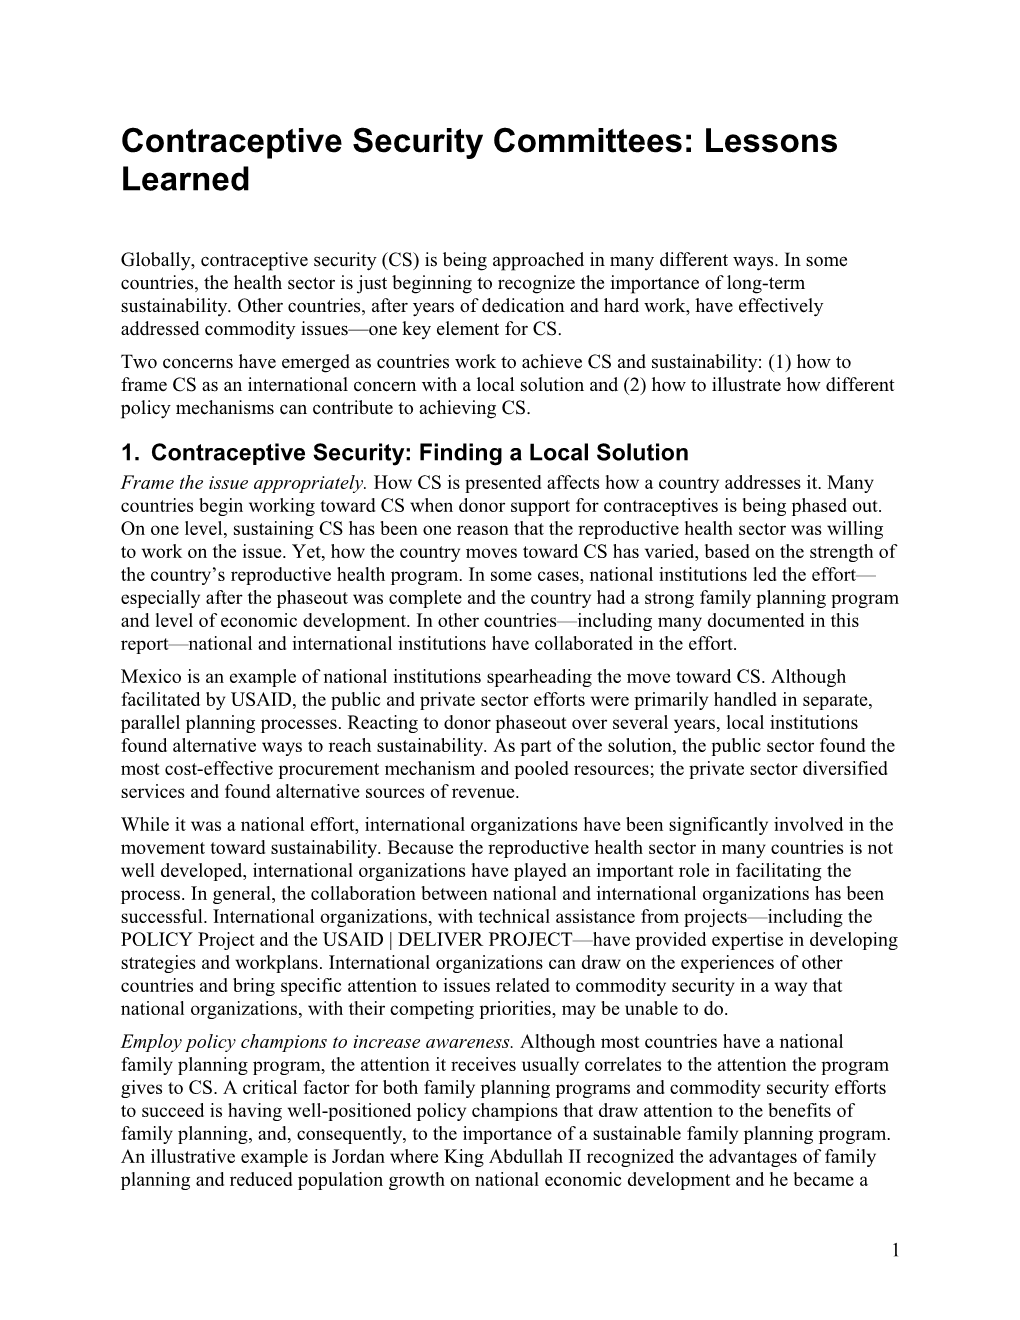 Contraceptive Security Committees:Lessons Learned